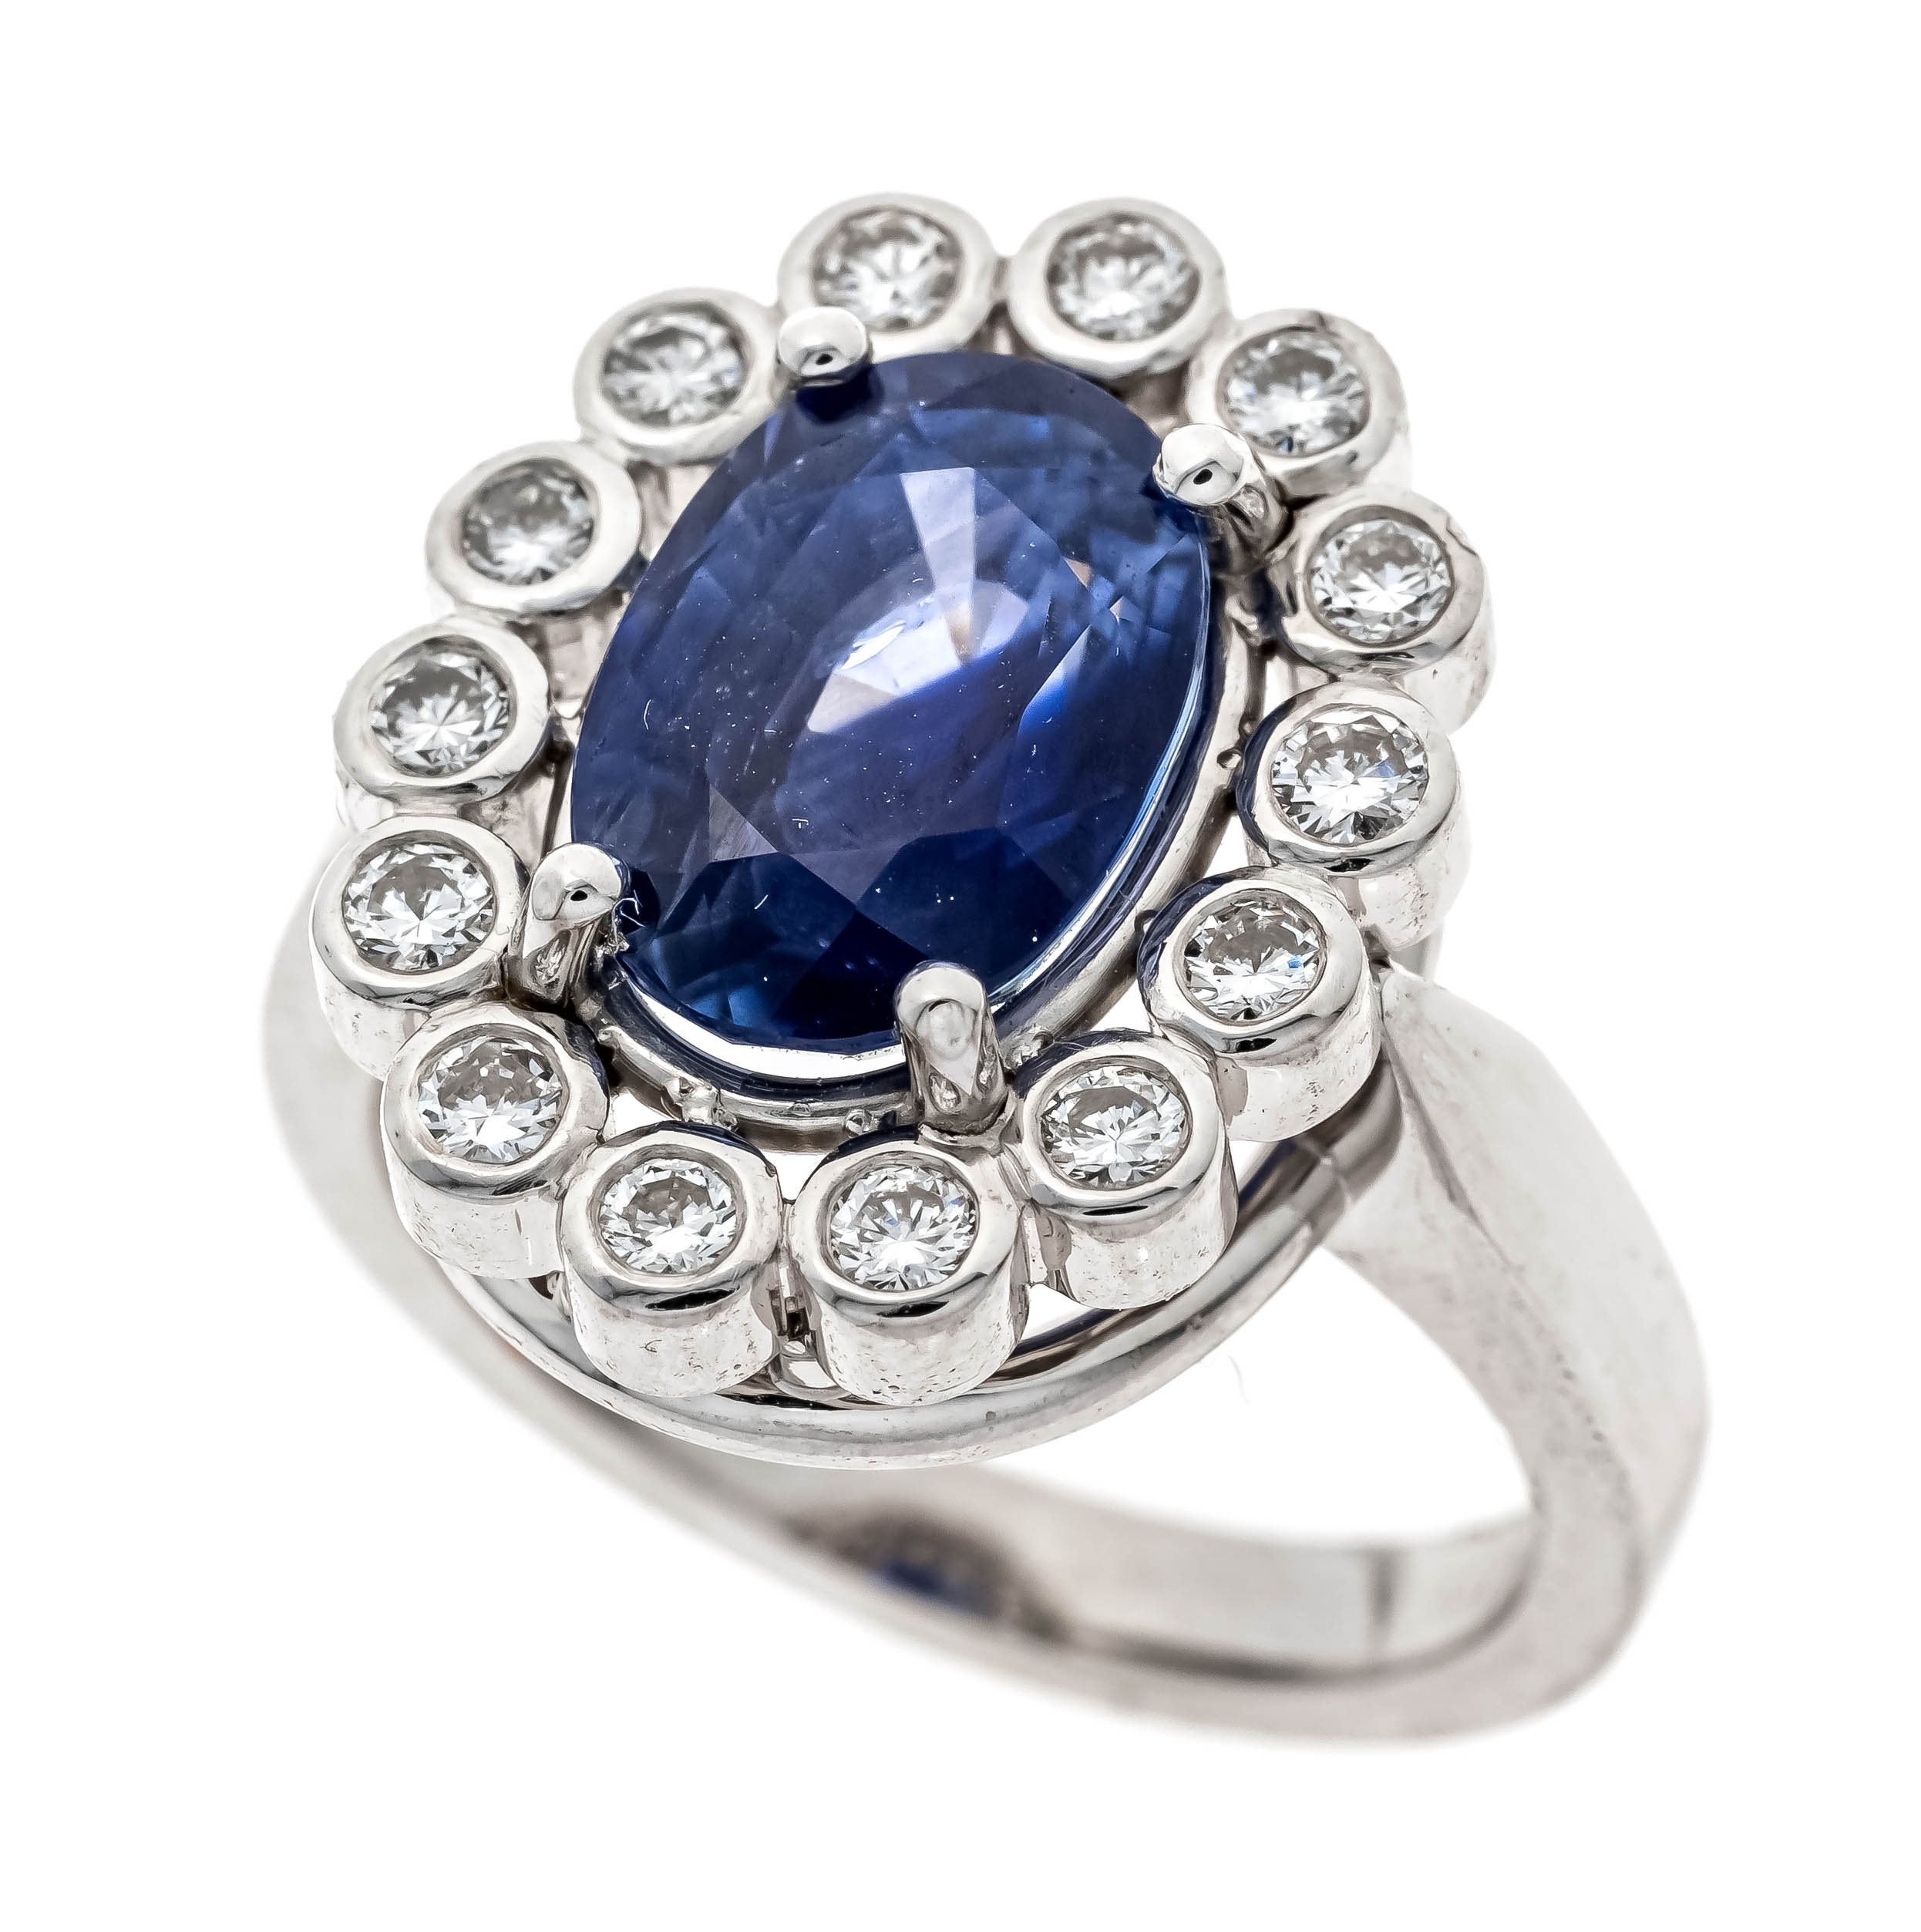 Sapphire diamond ring WG 750/000 with a fine oval faceted sapphire 4,82 ct (engraved) shining